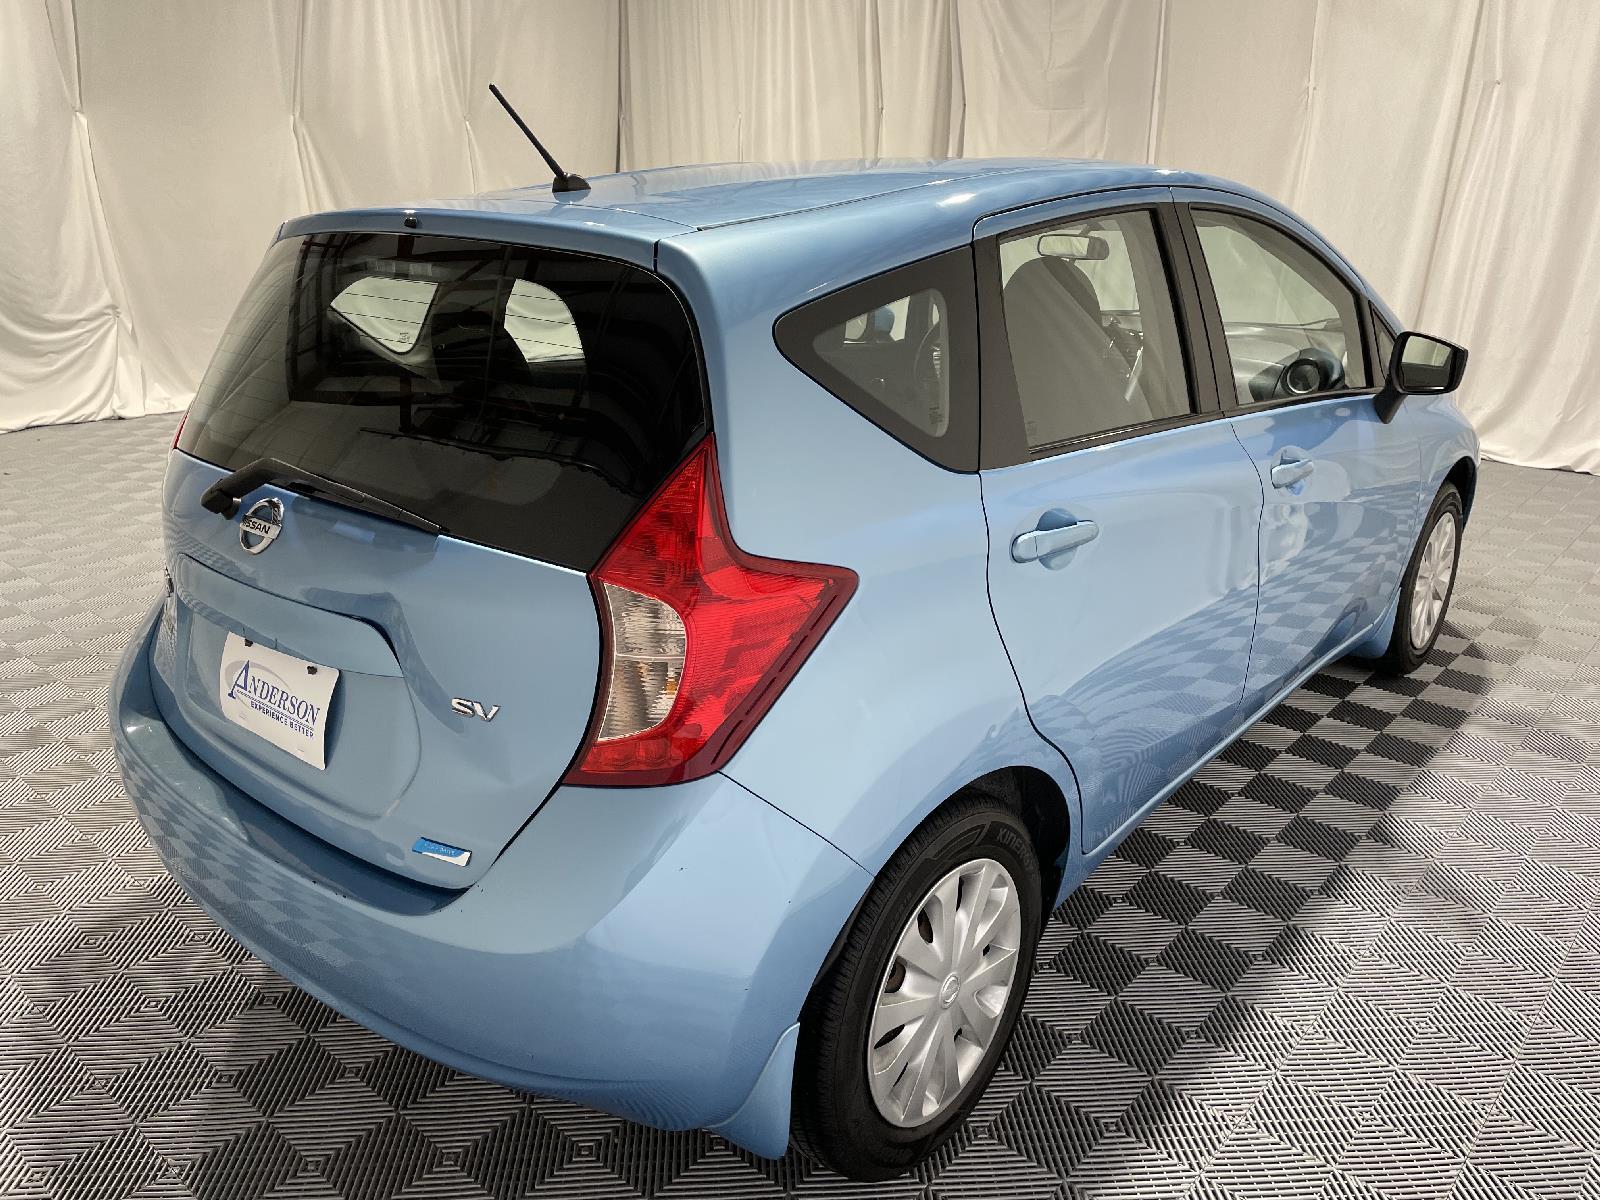 Used 2015 Nissan Versa Note SV Hatchback for sale in St Joseph MO